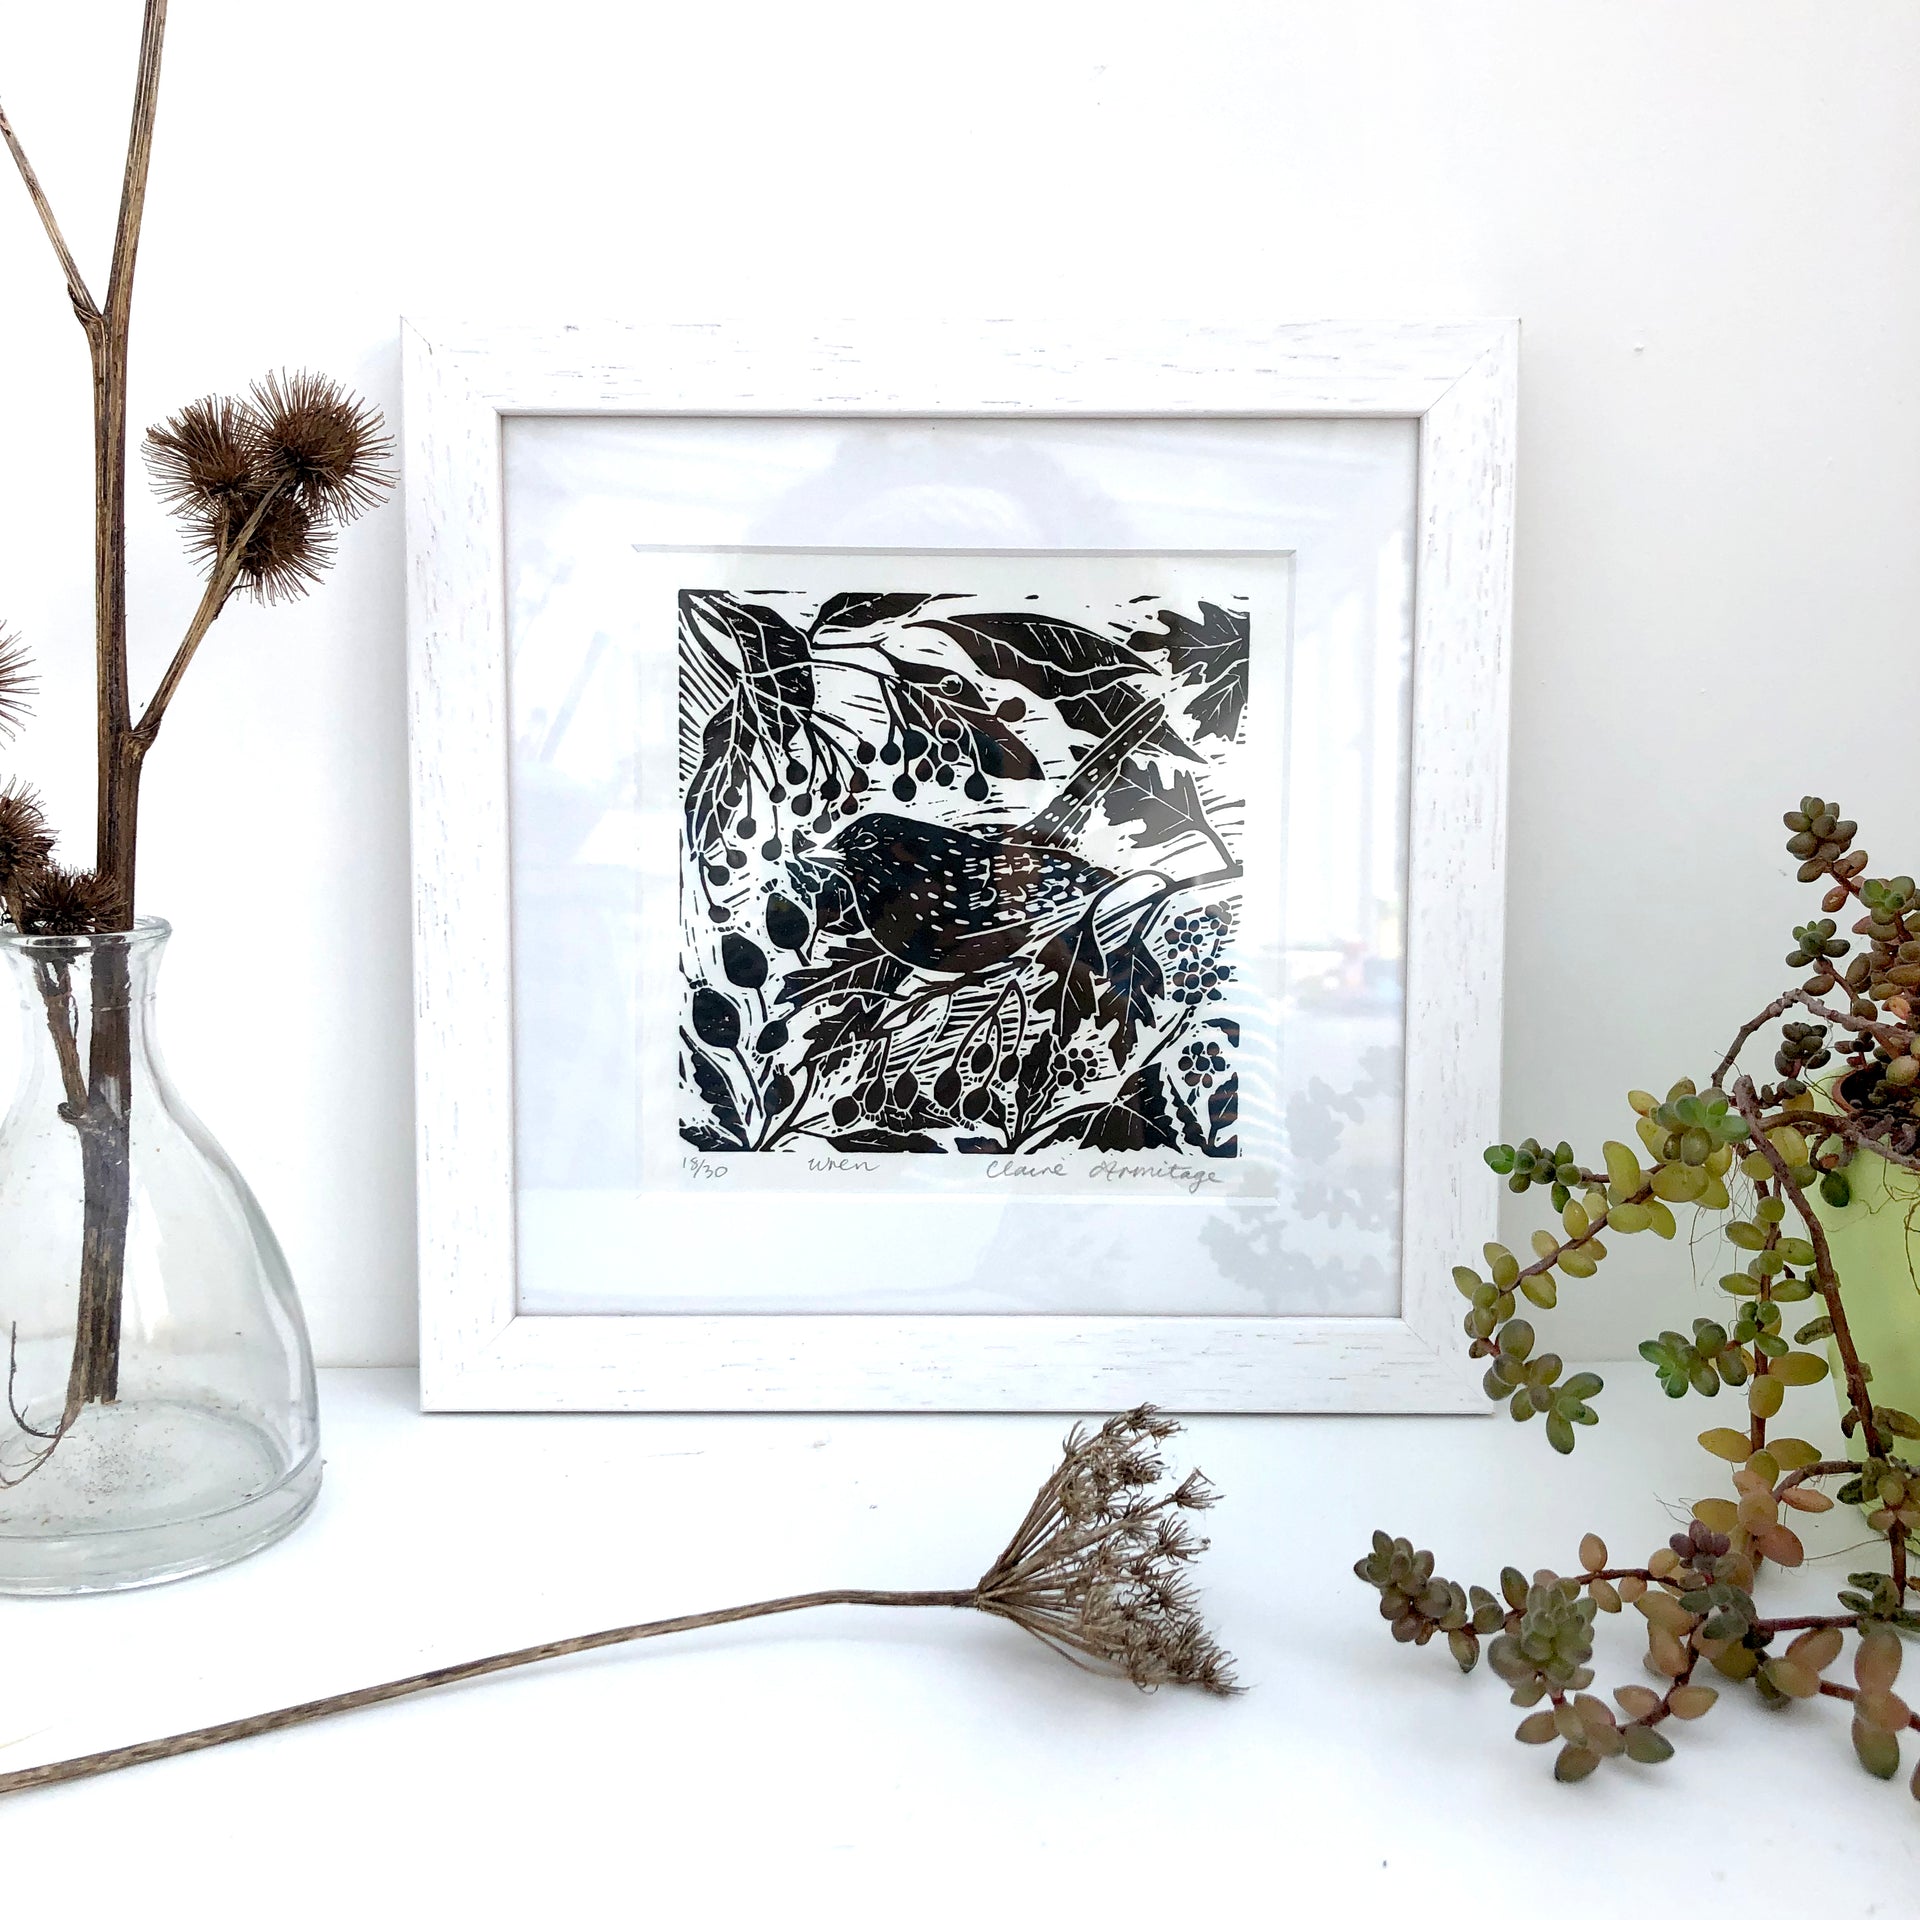 Wren limited edition lino print by Claire Armitage